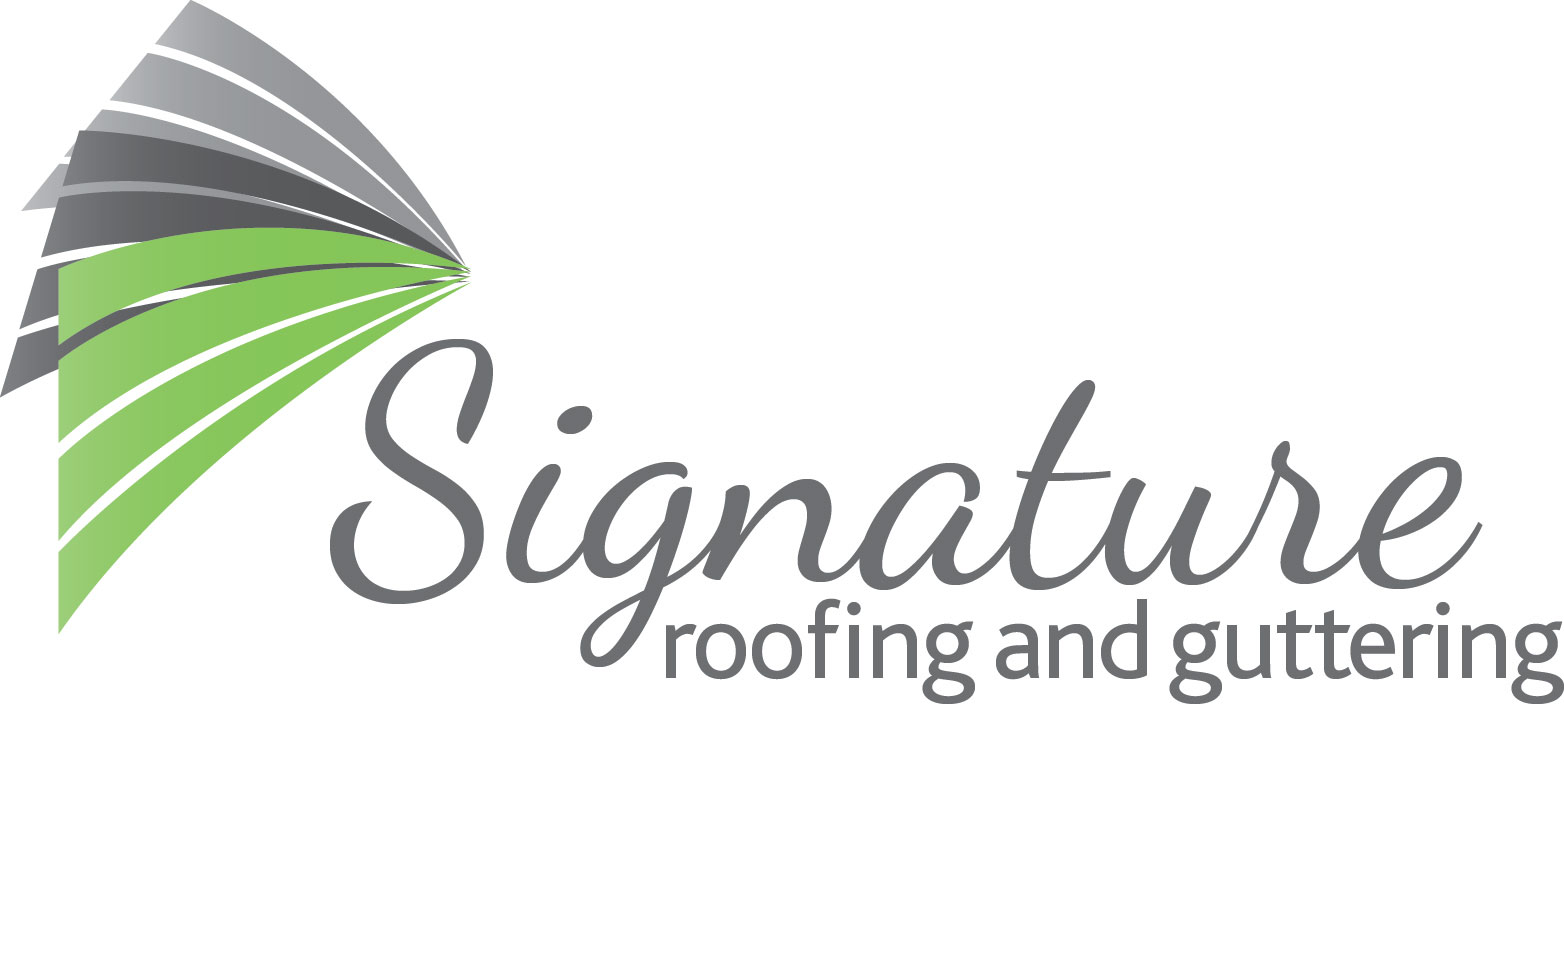 Signature Roofing and Guttering